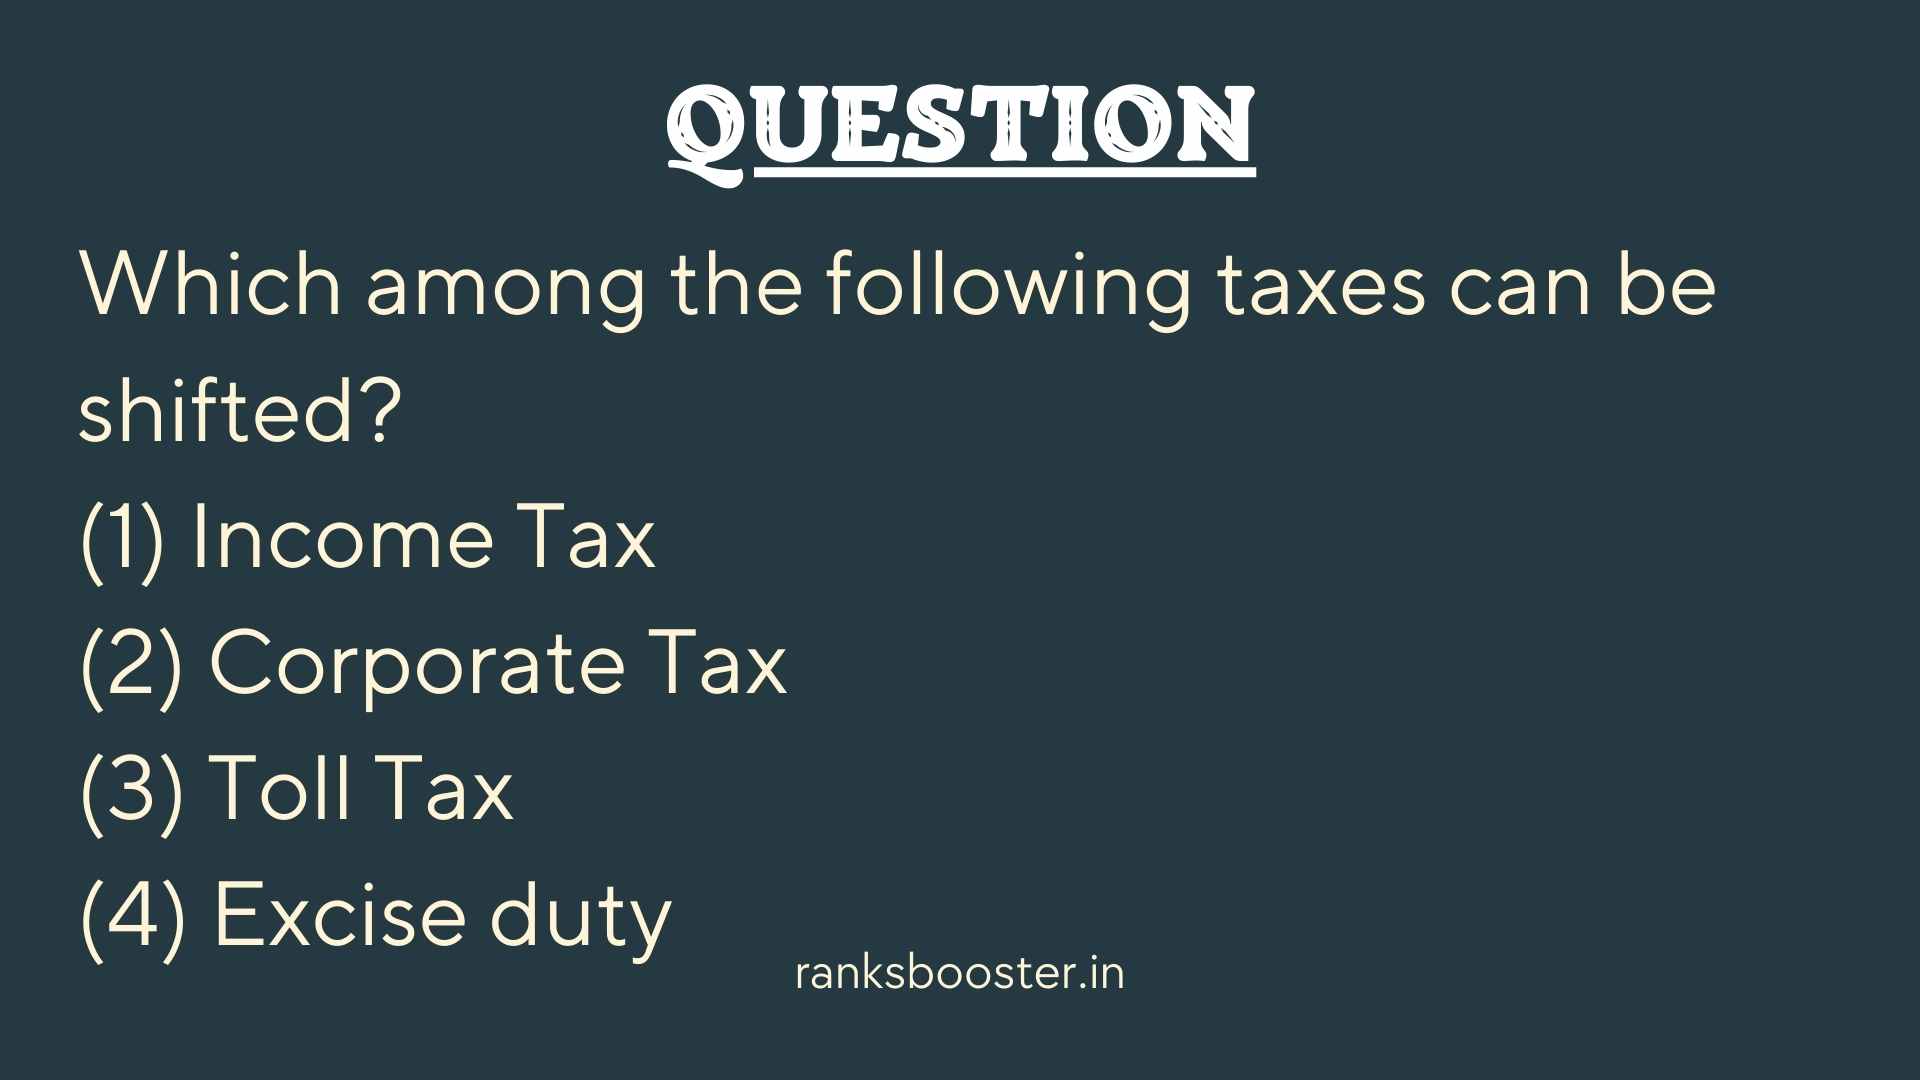 Which among the following taxes can be shifted?